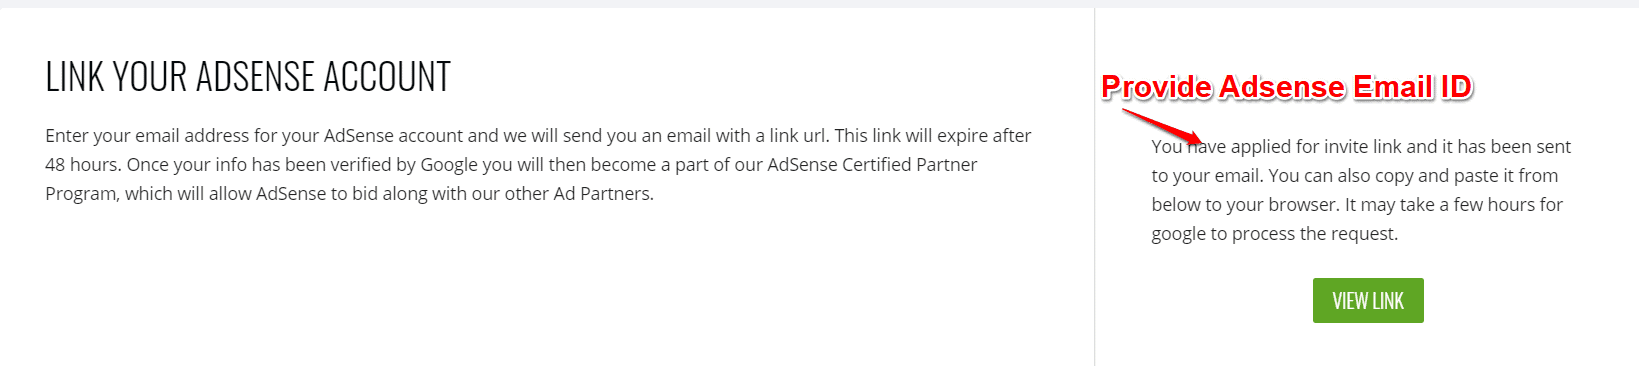 Link Adsense account with Ezoic